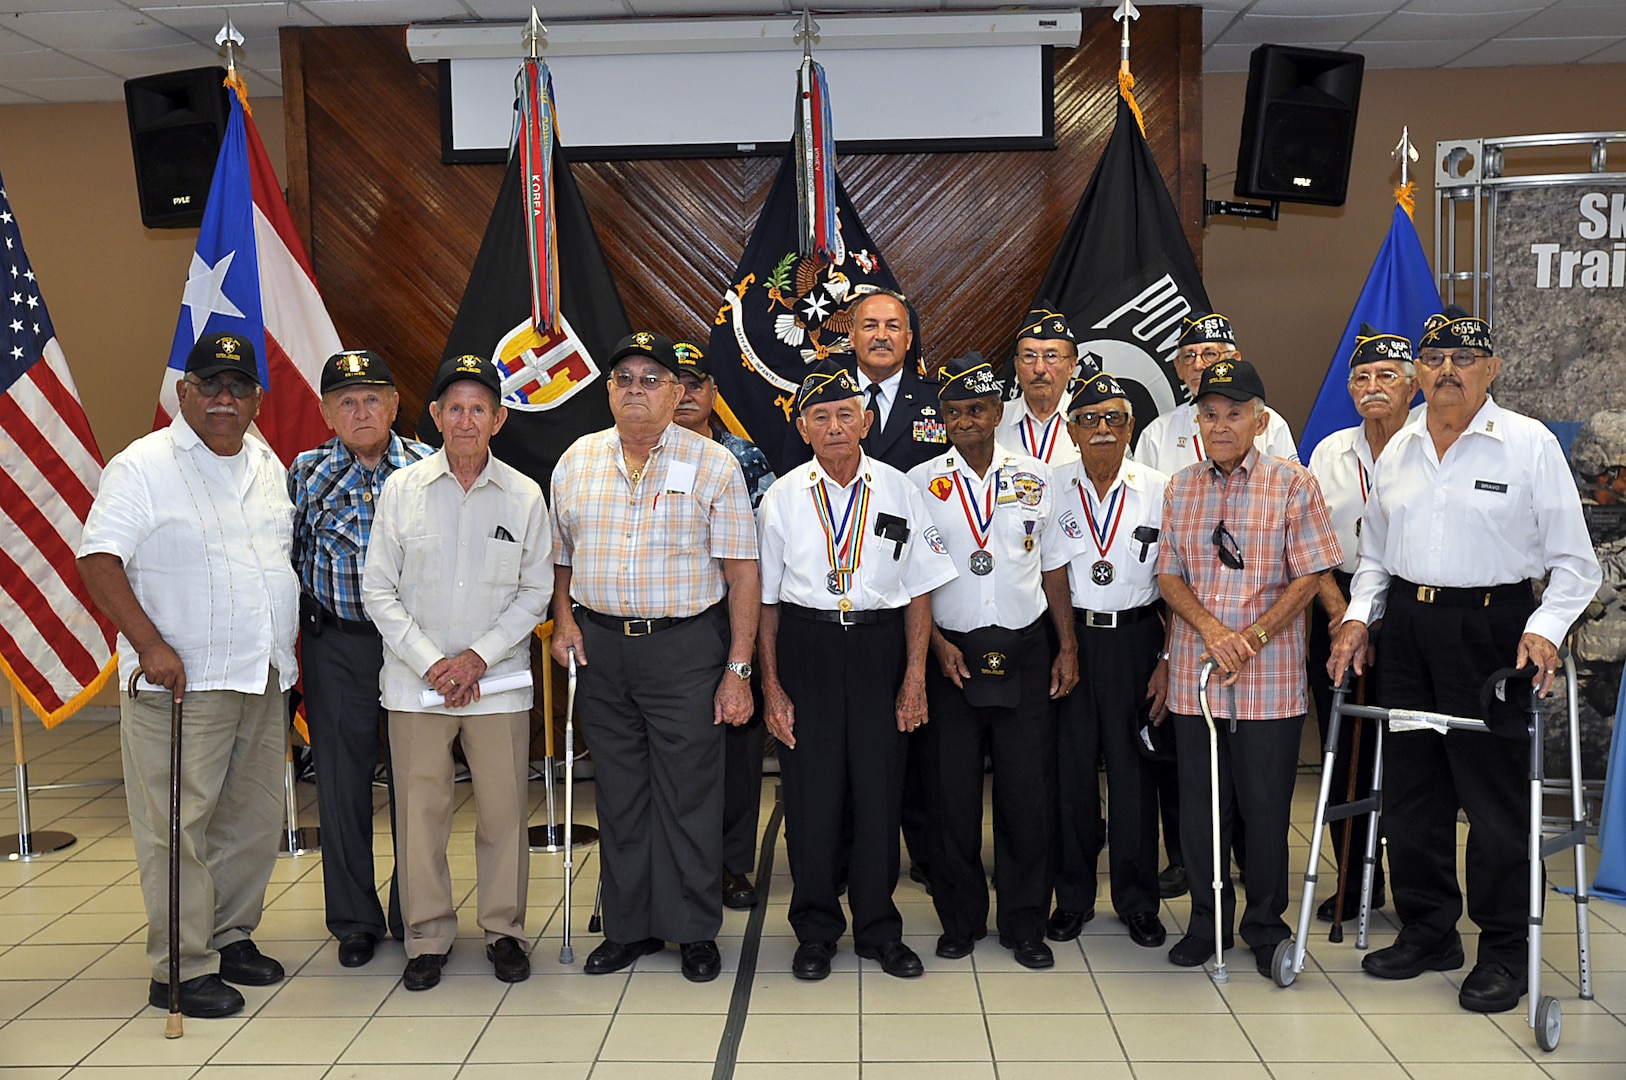 The adjutant general of Puerto Rico Brig. Gen. Juan J. Medina Lamela, with a group of veteran Borinqueneers of the 65th Infantry Regiment at the roundtable The Borinqueneers: Then and Now: The Evolution of the 65th Infantry Regiment in San Juan on June 24, 2014.